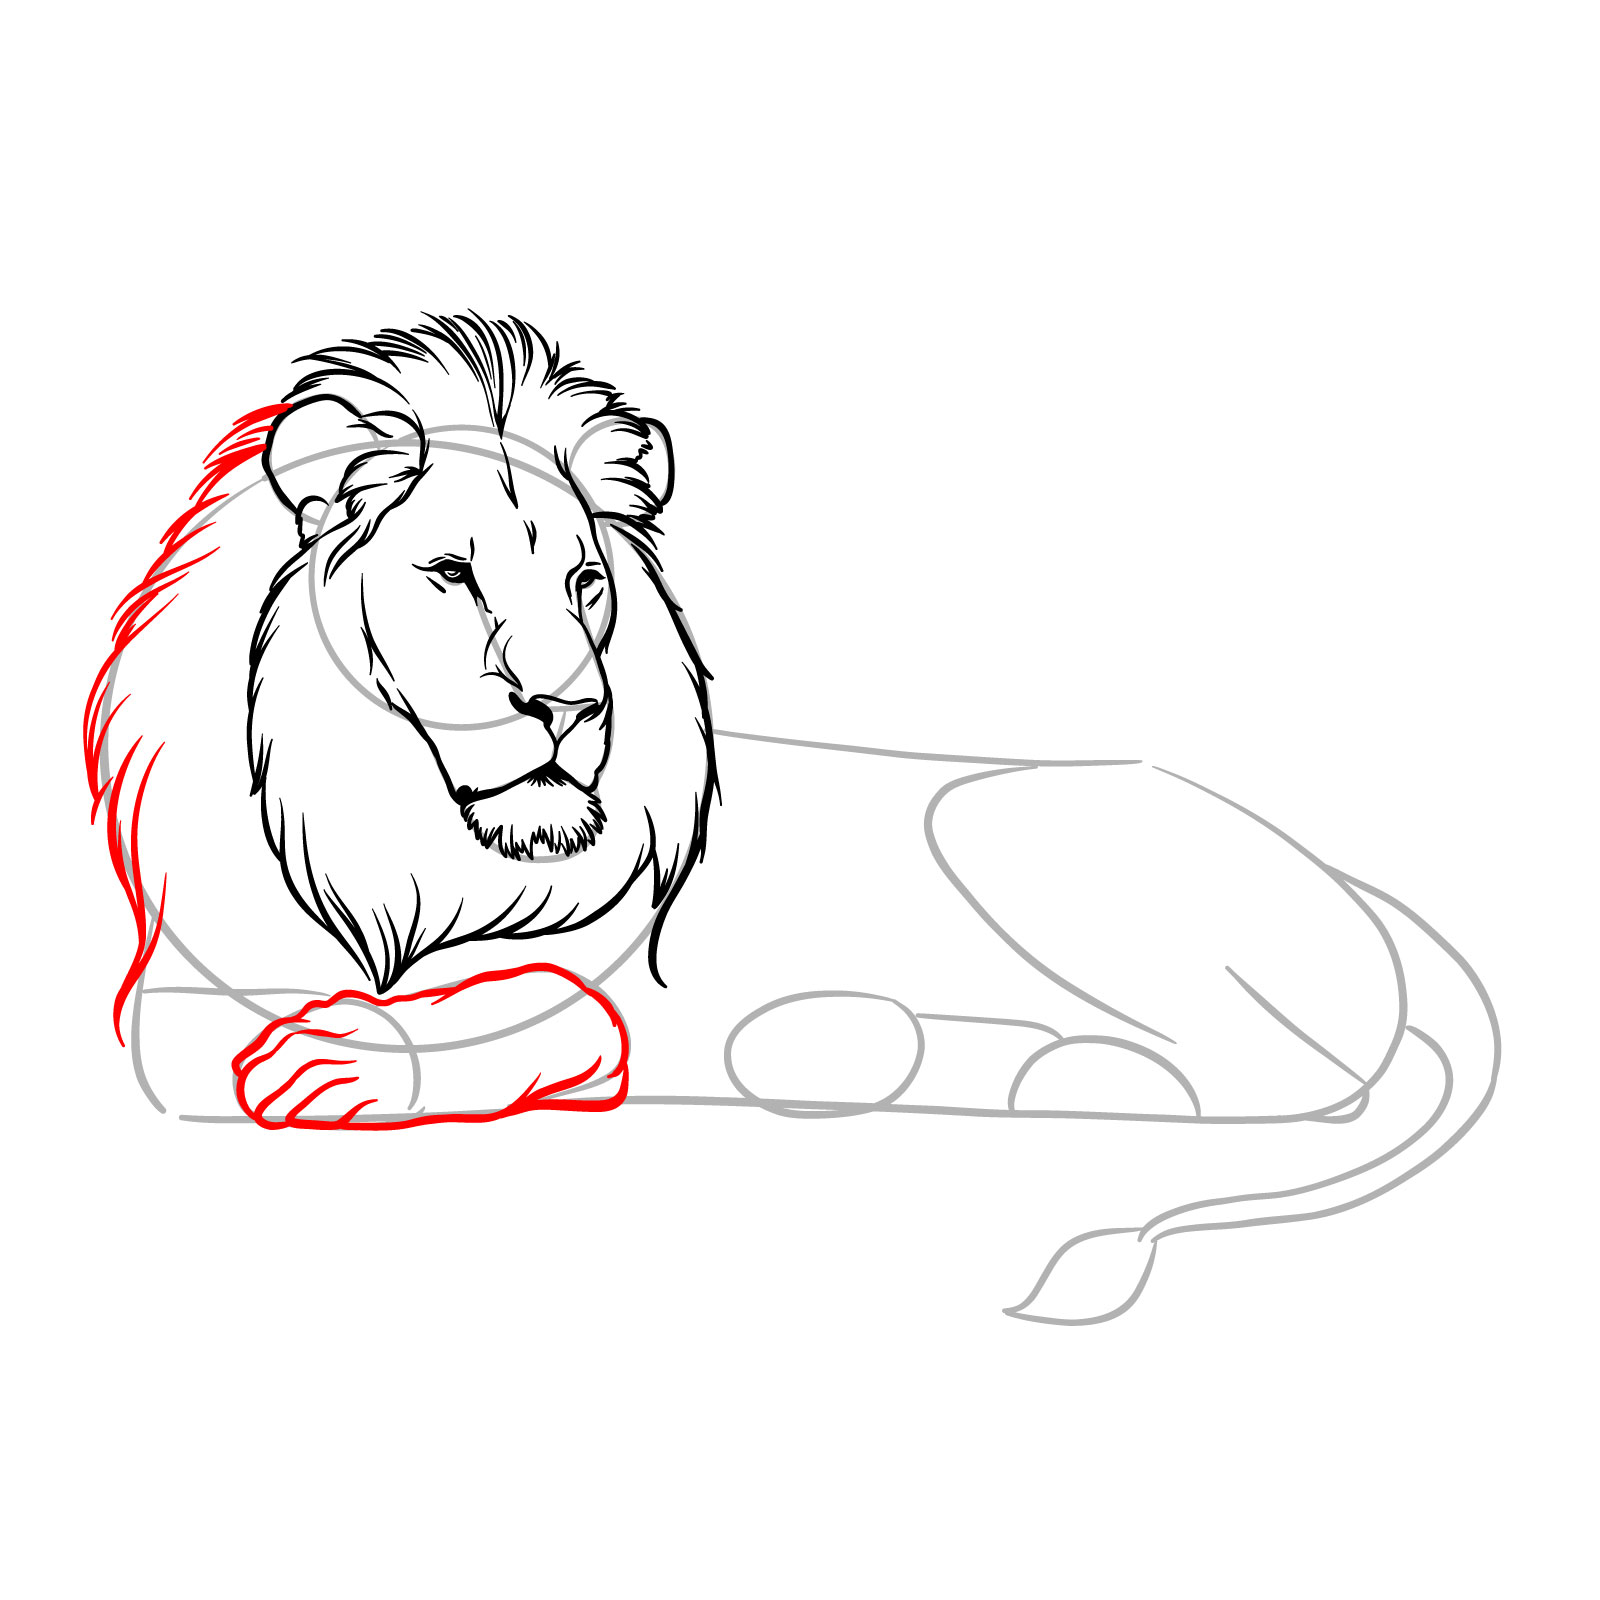 How to draw a lying lion in side view - Step 9: Adding mane and front leg details